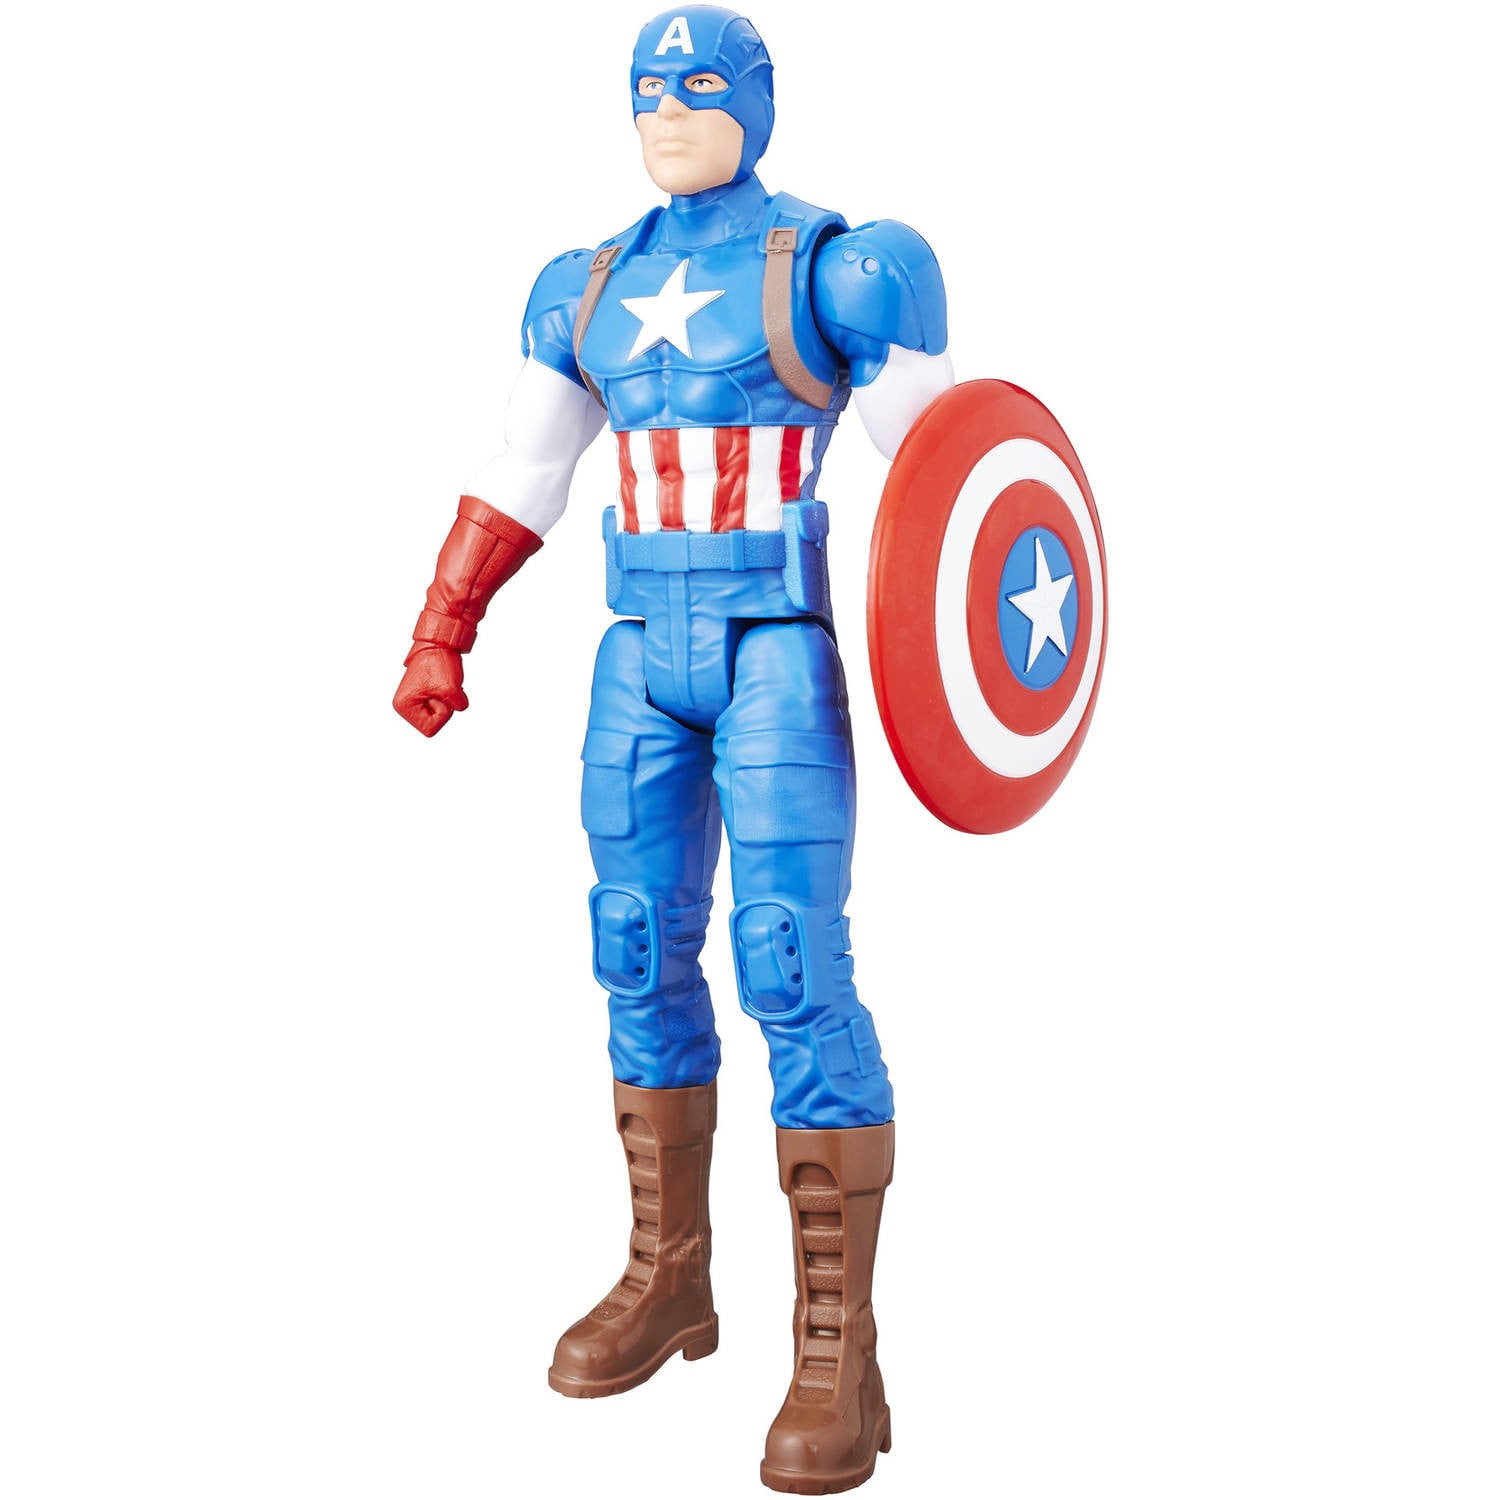 Includes Wings for Kids Ages 4 and Up 12-Inch Toy Avengers Marvel Studios Titan Hero Series Captain America Action Figure 